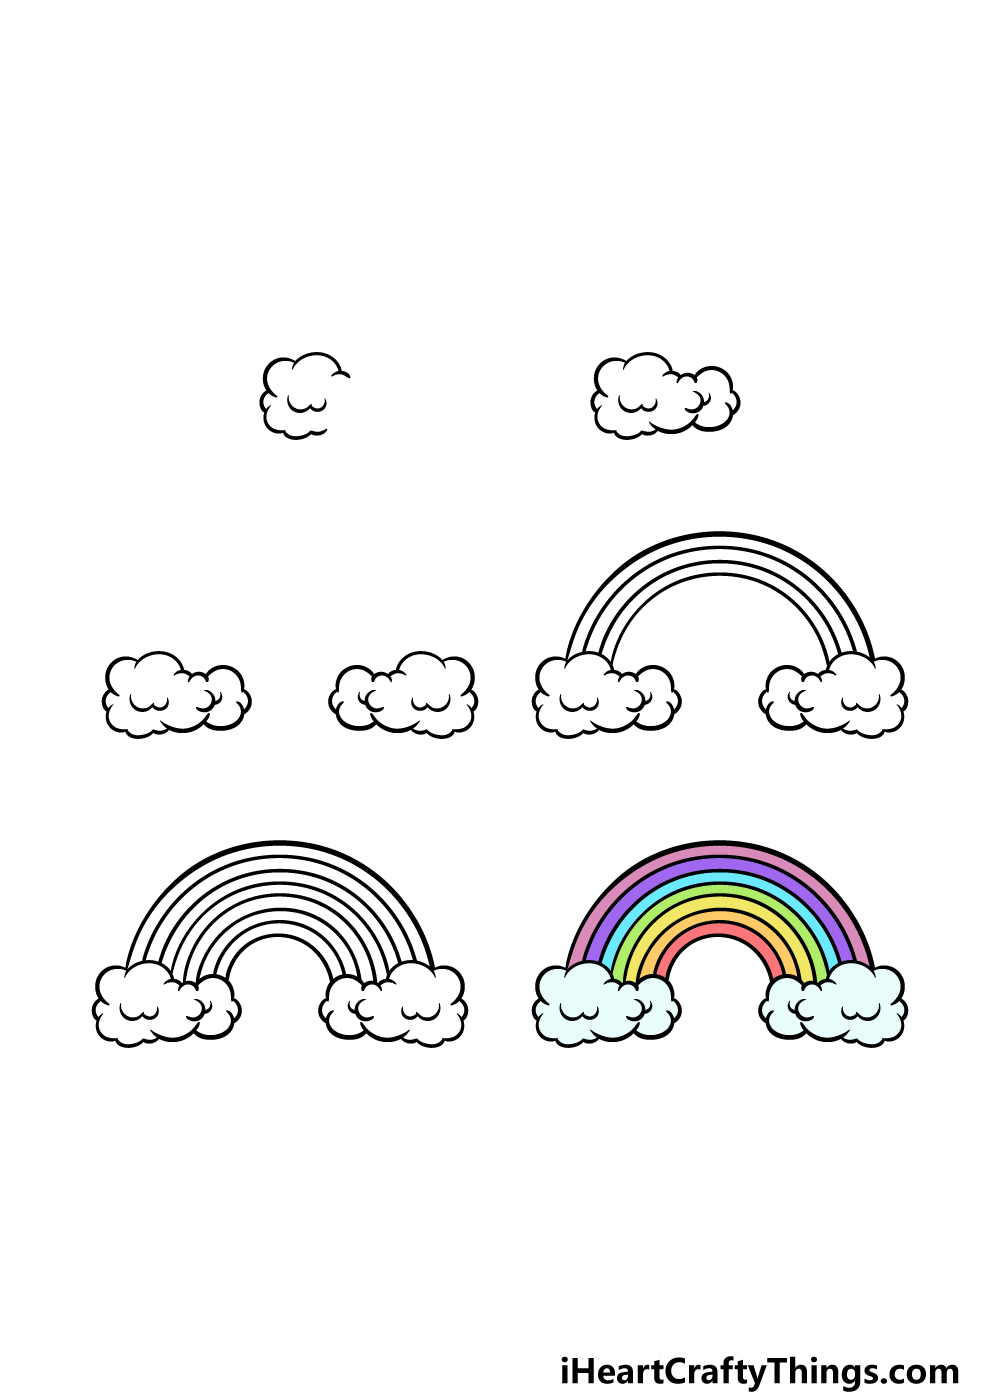 How to Draw A Cartoon Rainbow in 6 steps